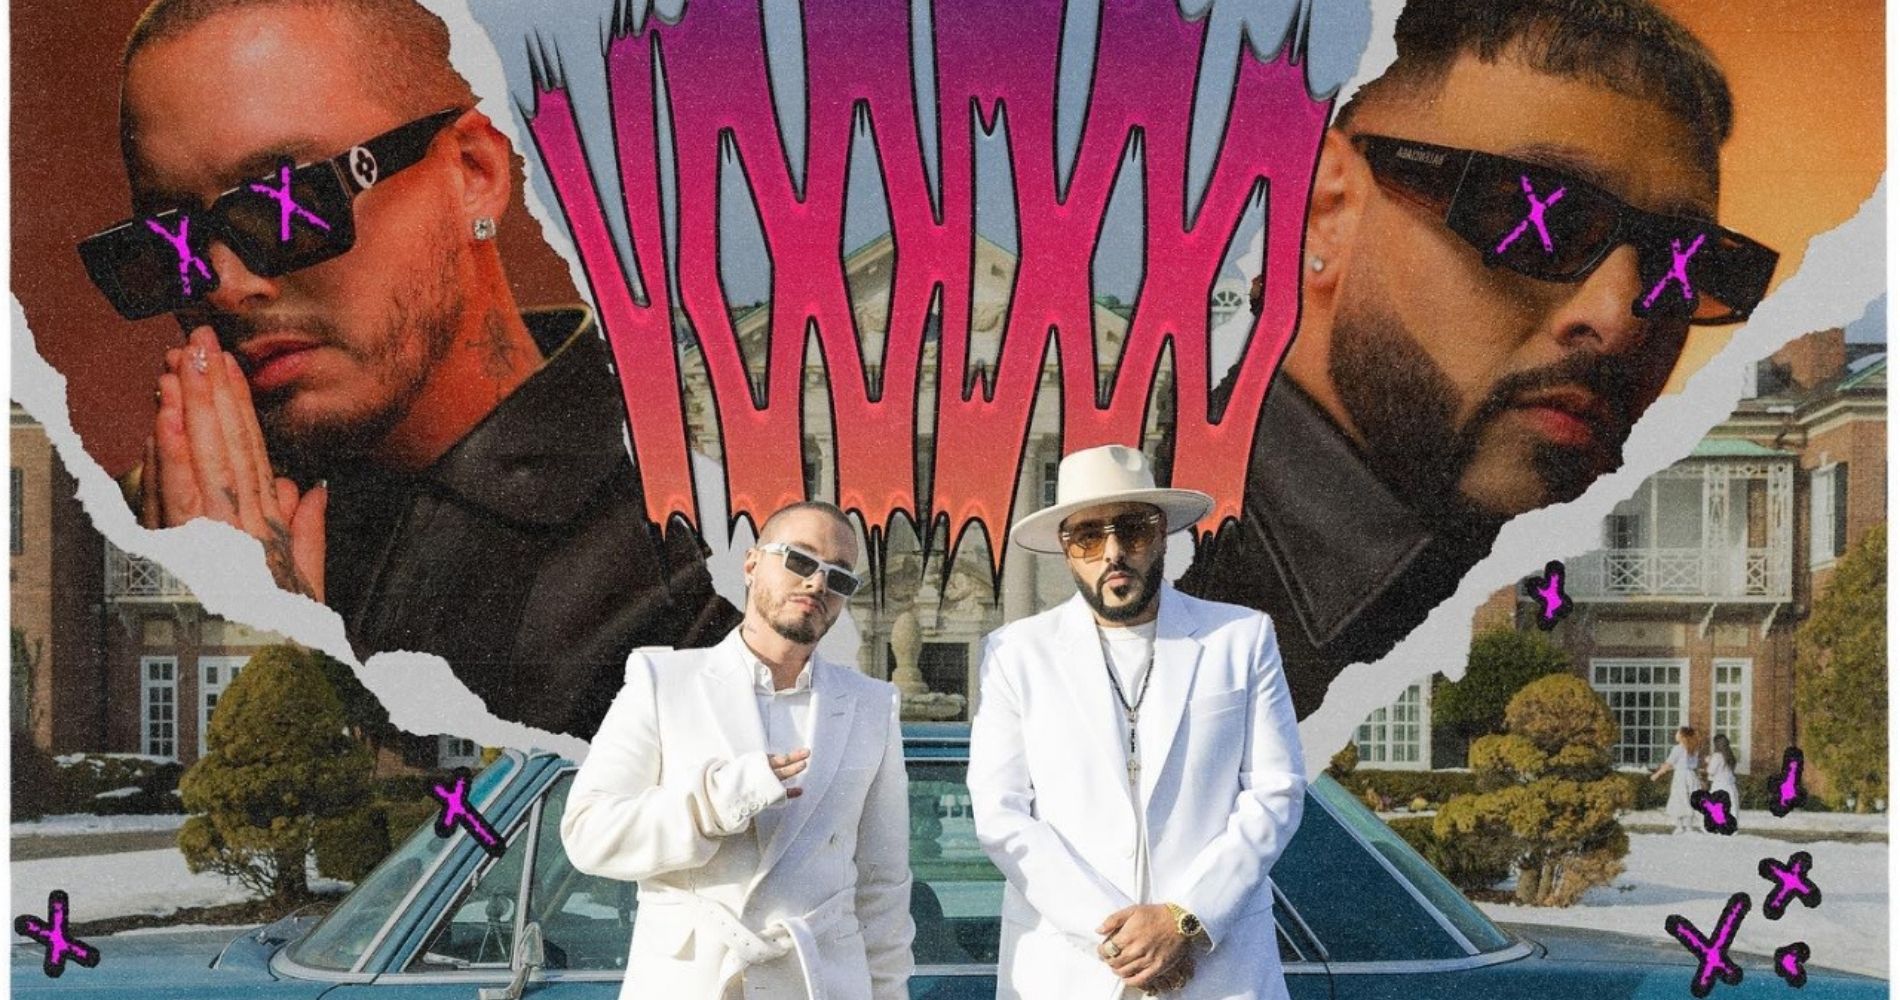 'Voodoo' marks the first proper collaboration between Badshah and Latinx icon, J Balvin